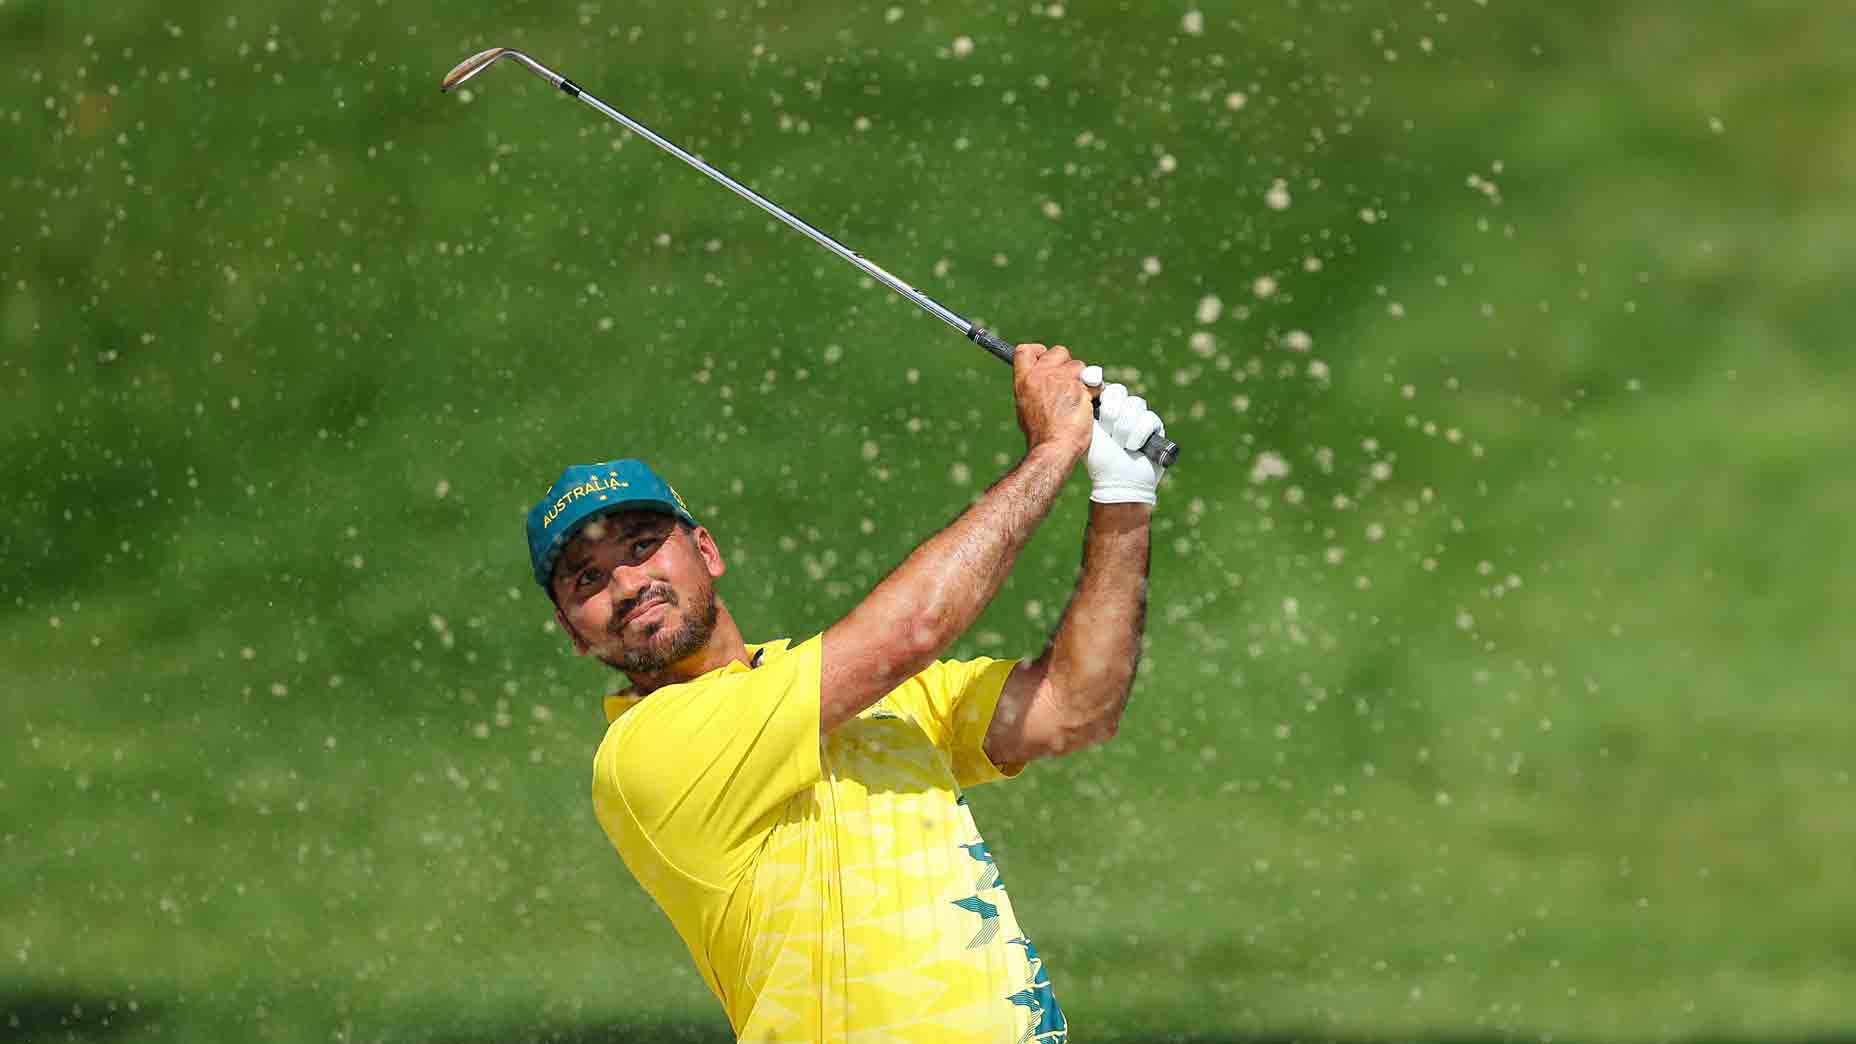 Eight years later, former world No. 1 Jason Day opens up on a career regret